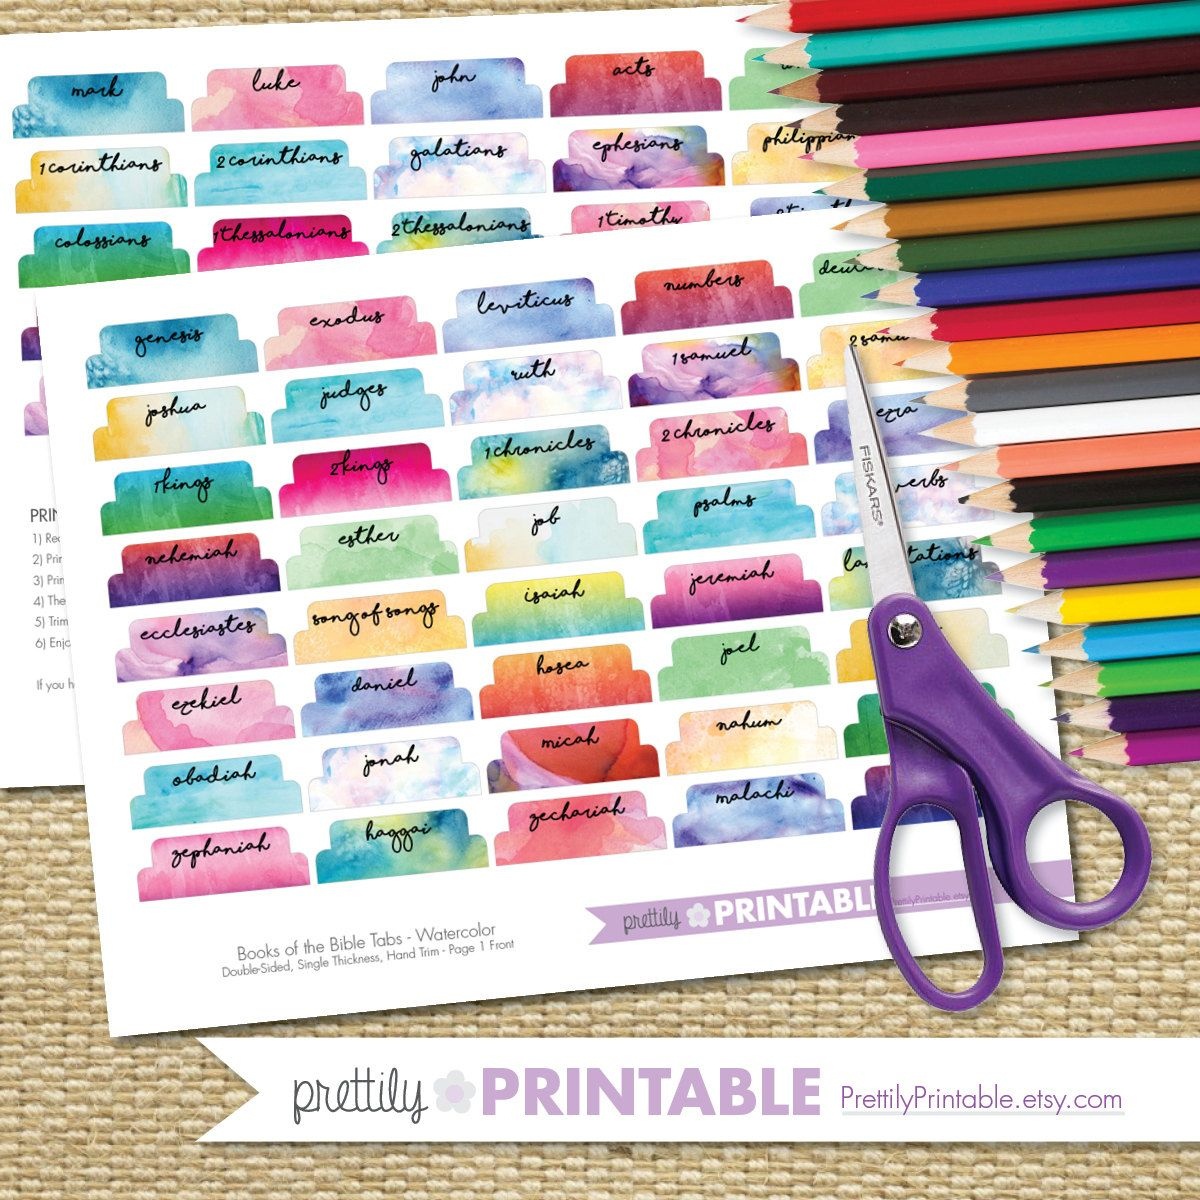 Printable Books Of The Bible Tabs - Watercolor (For Hand Trimming - Free Printable Bible Tabs